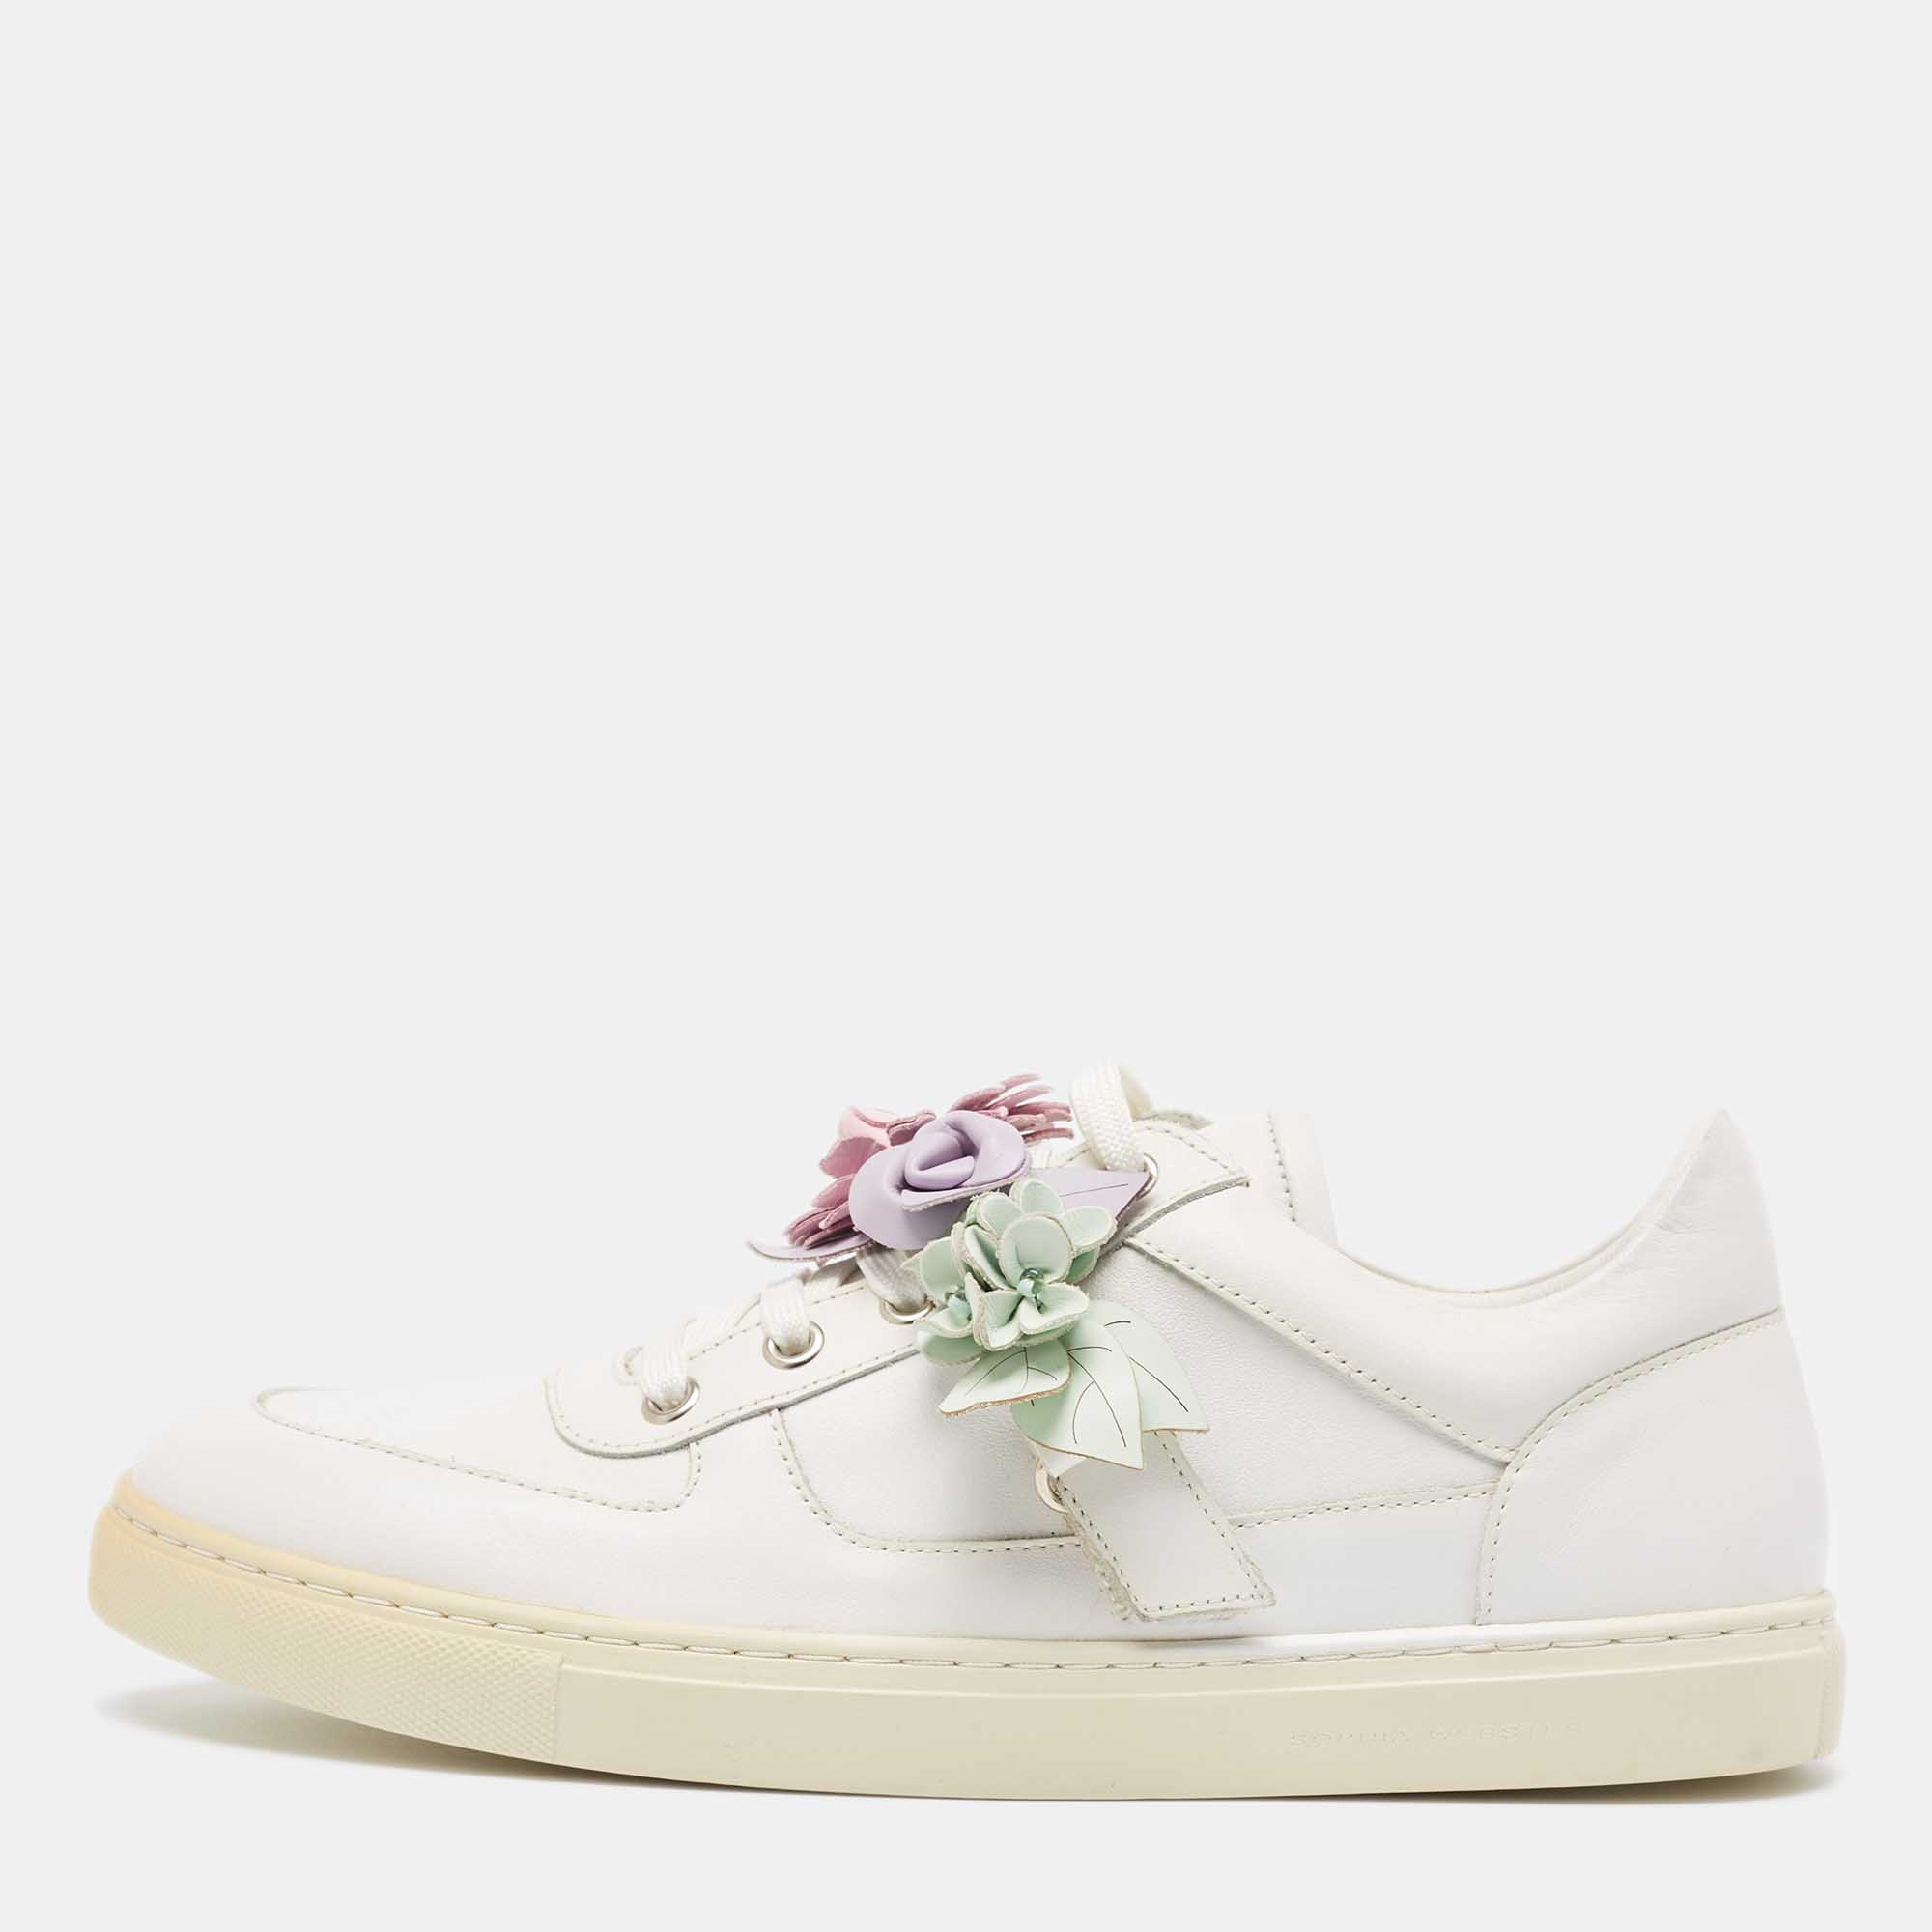 Pre-owned Sophia Webster White Leather Flower Embellished Low Top Sneakers Size 42